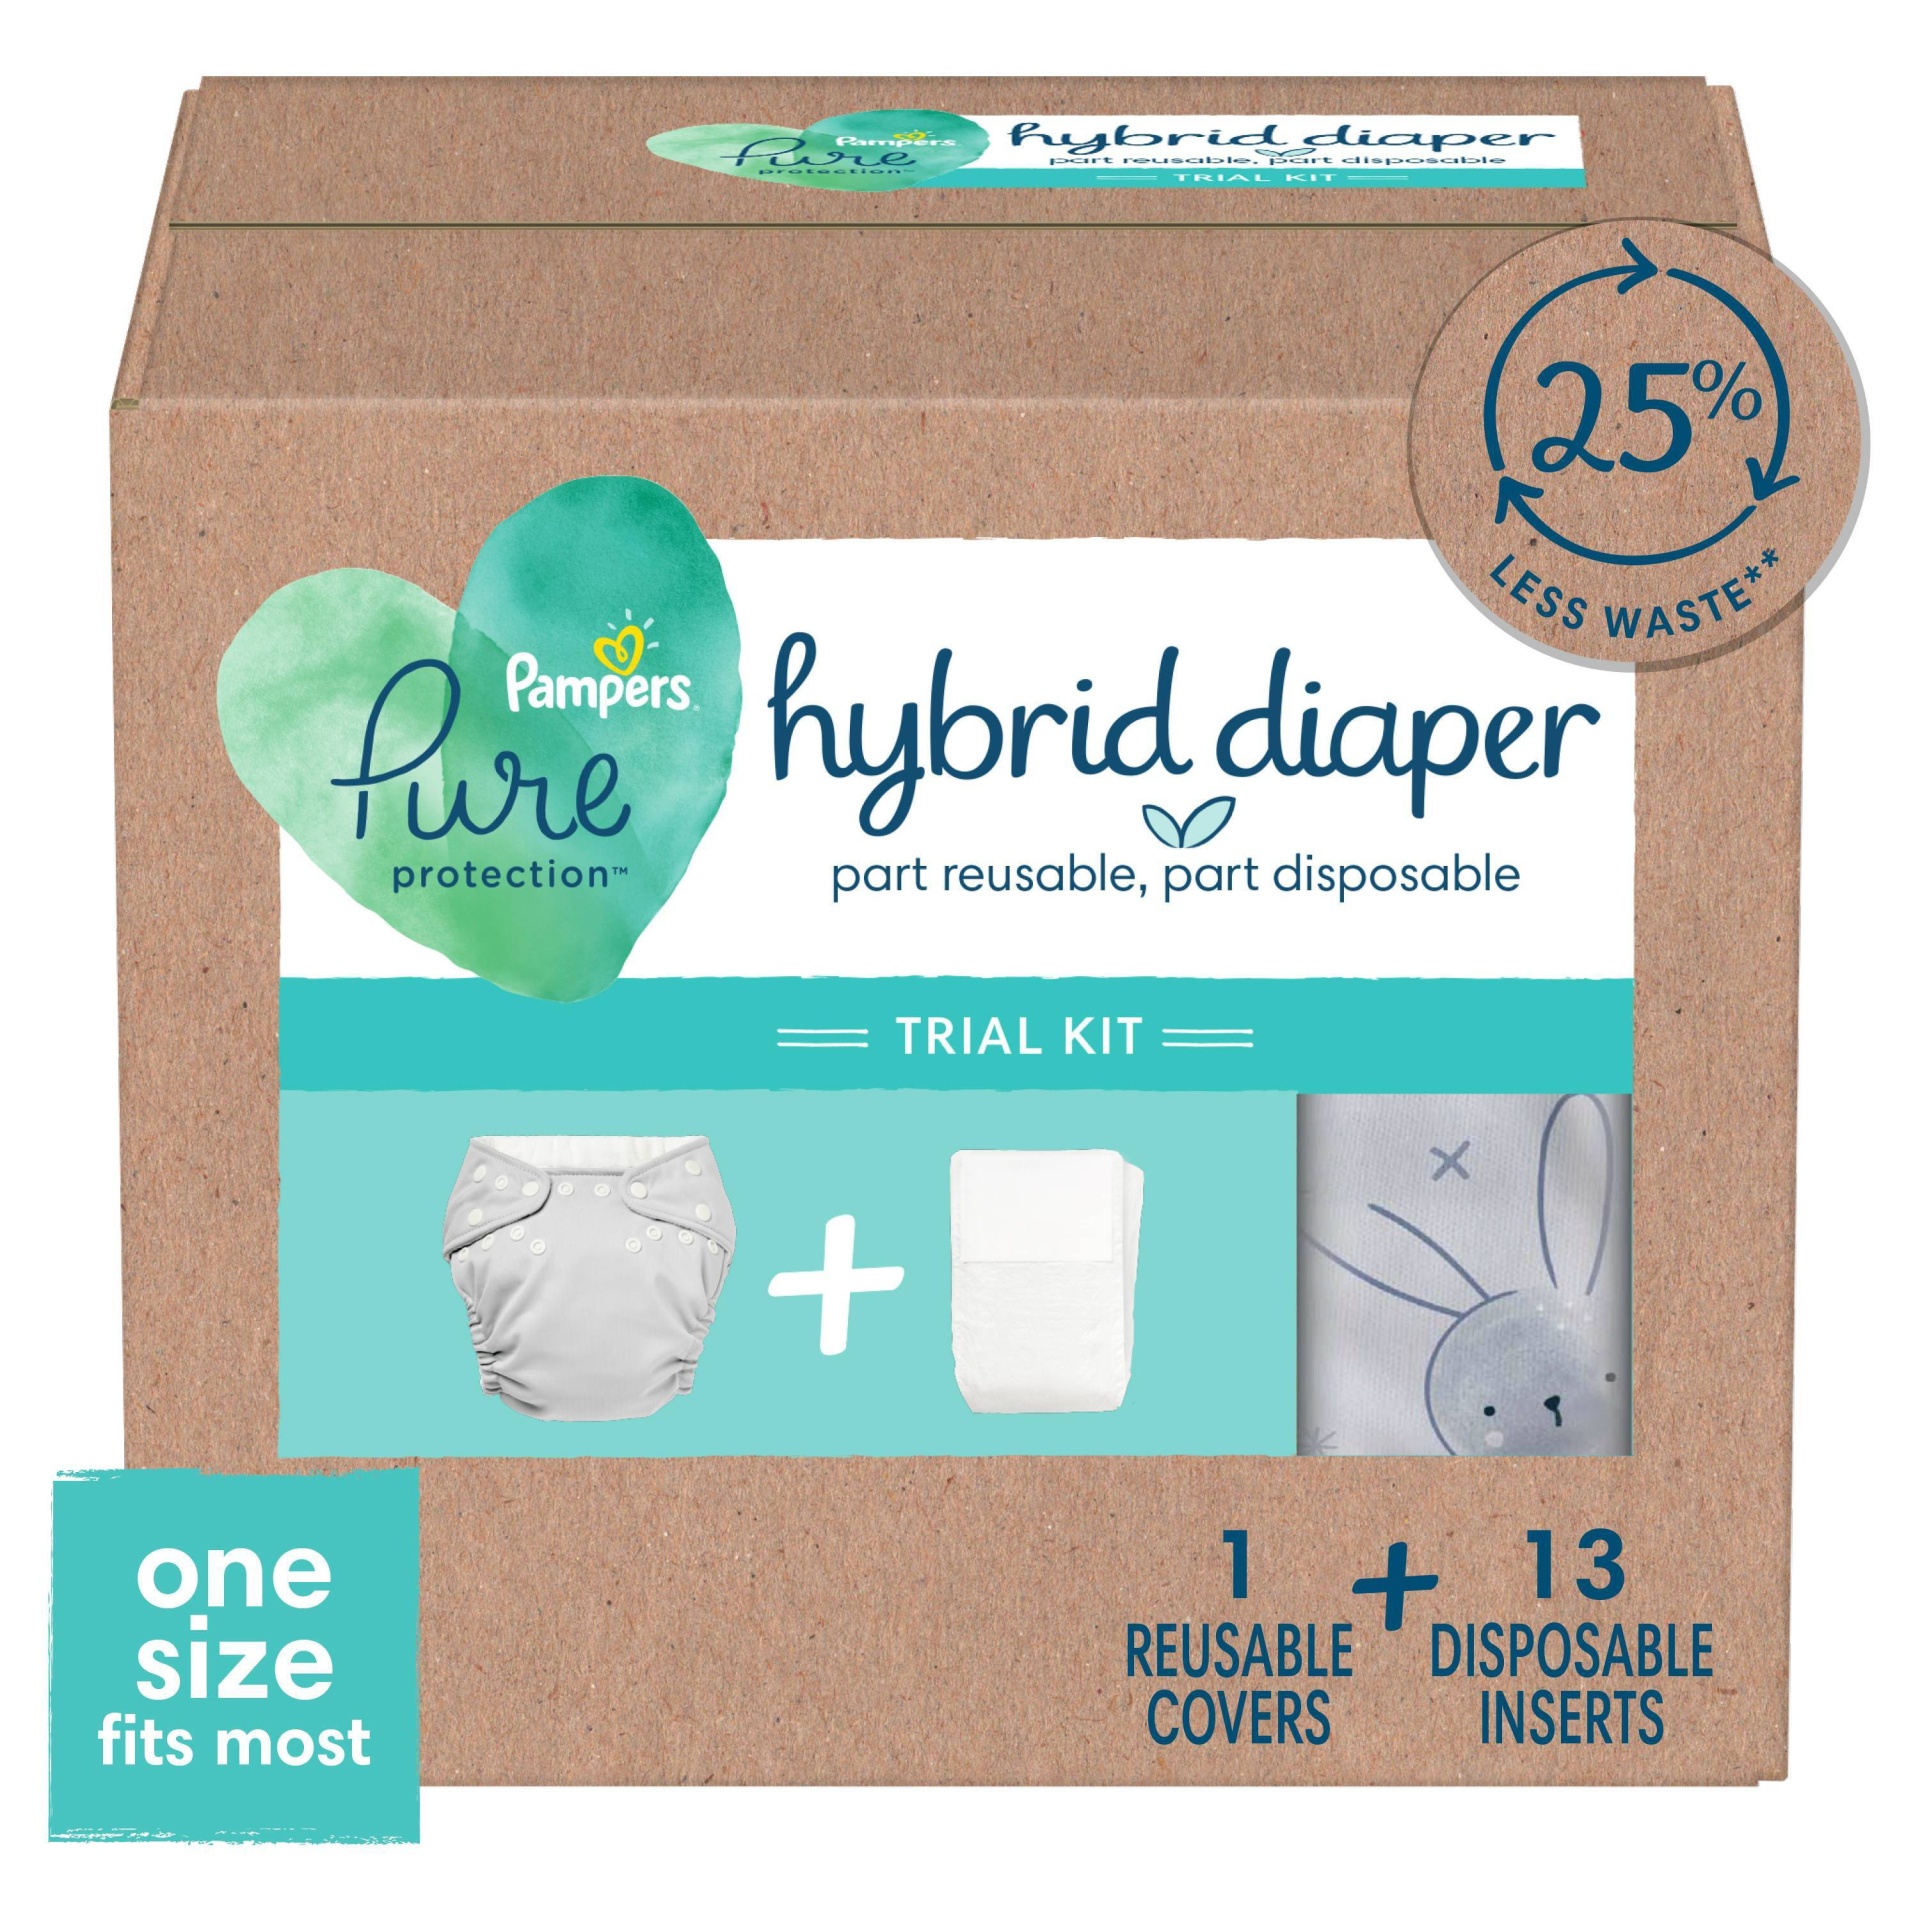 slide 1 of 11, Pampers Pure Hybrid Kits - Reusable Cloth Diaper Covers + Disposable Inserts - 13ct, 13 ct